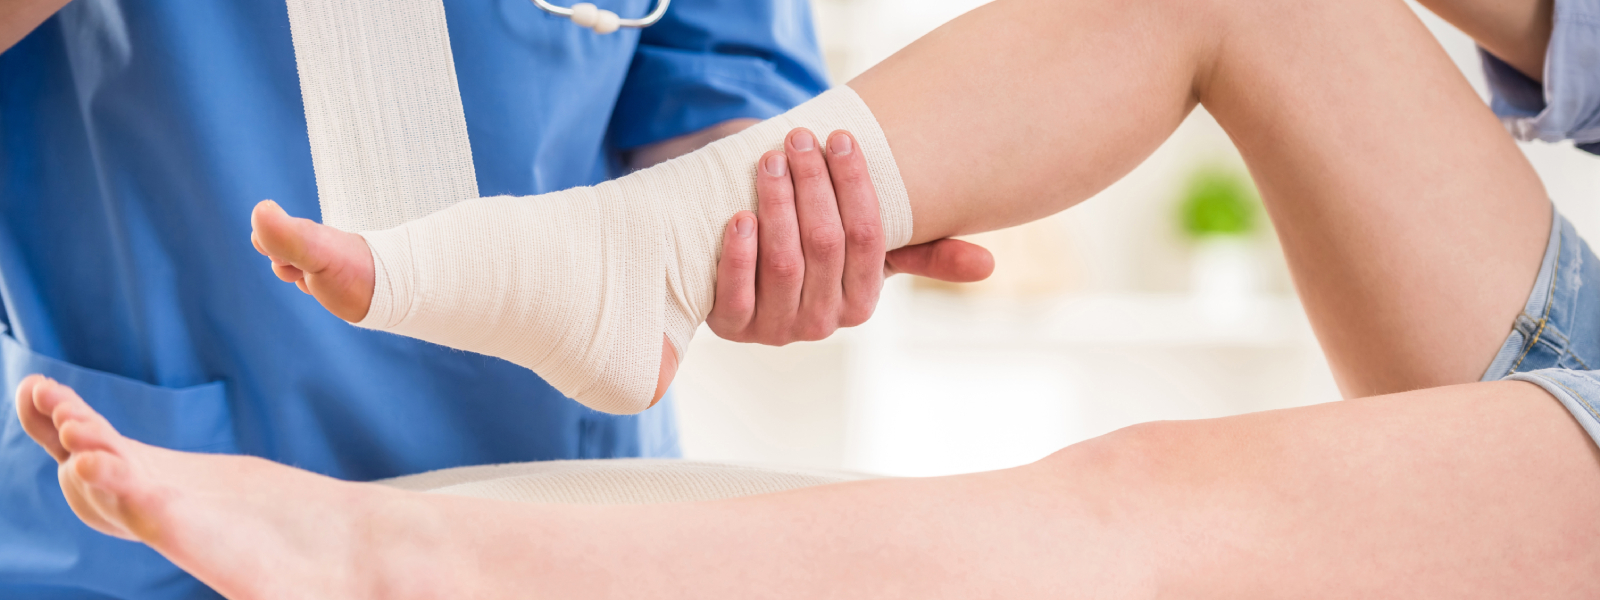 What Are the Signs It’s Time for Foot and Ankle Surgery?